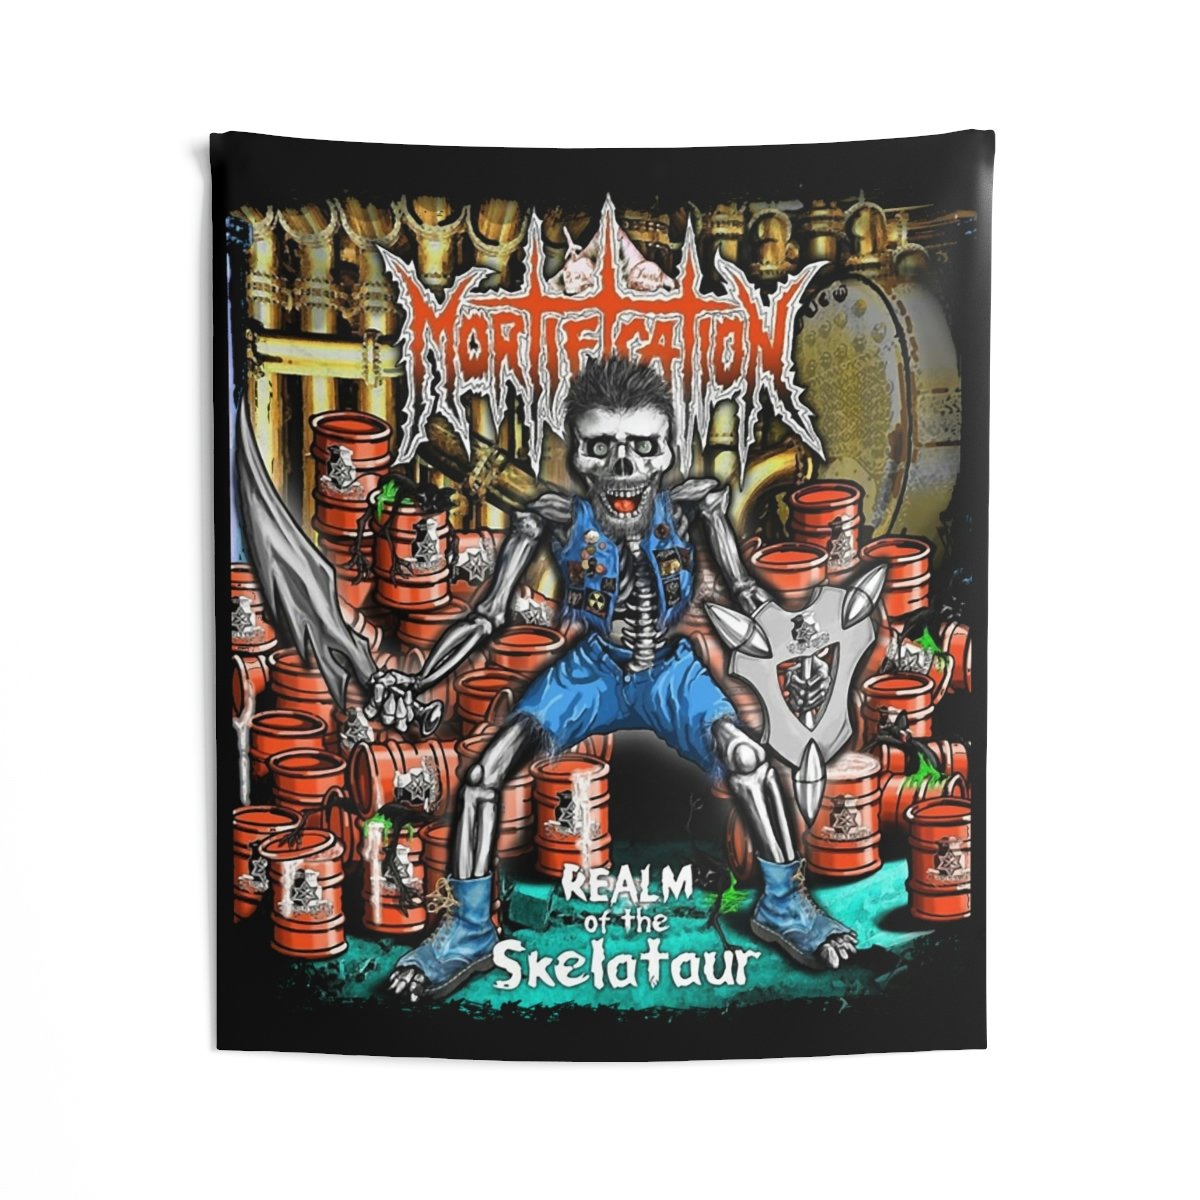 Mortification – Realm of the Skelataur Indoor Wall Tapestries